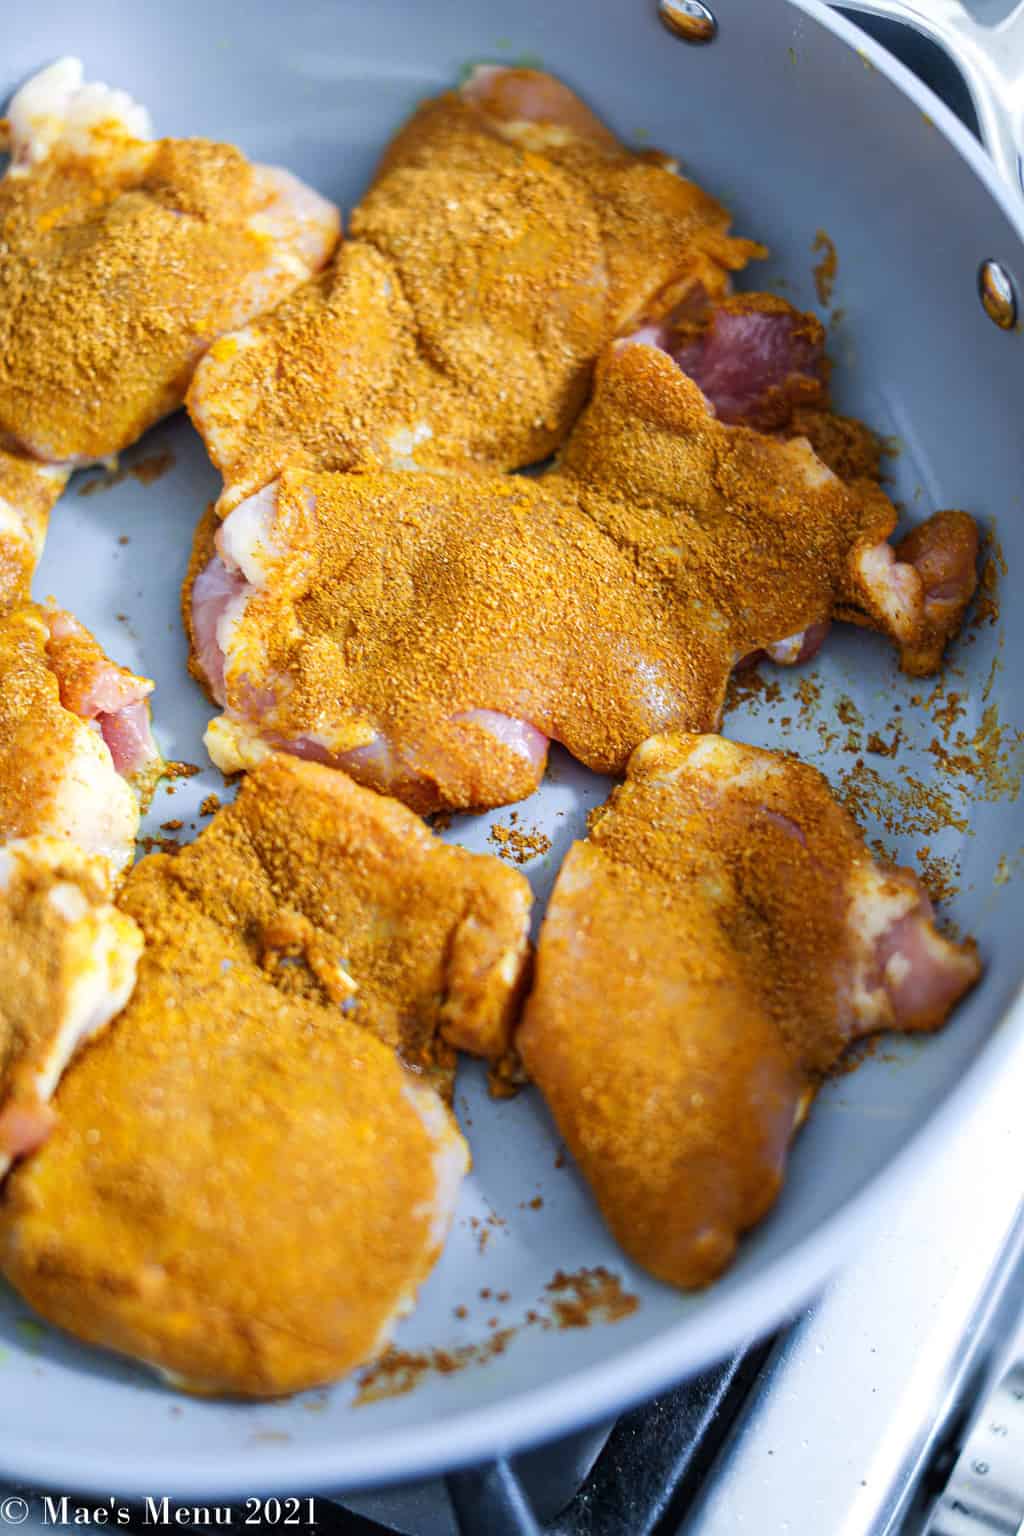 Turmeric rubbed chicken in a non-stick cook pan